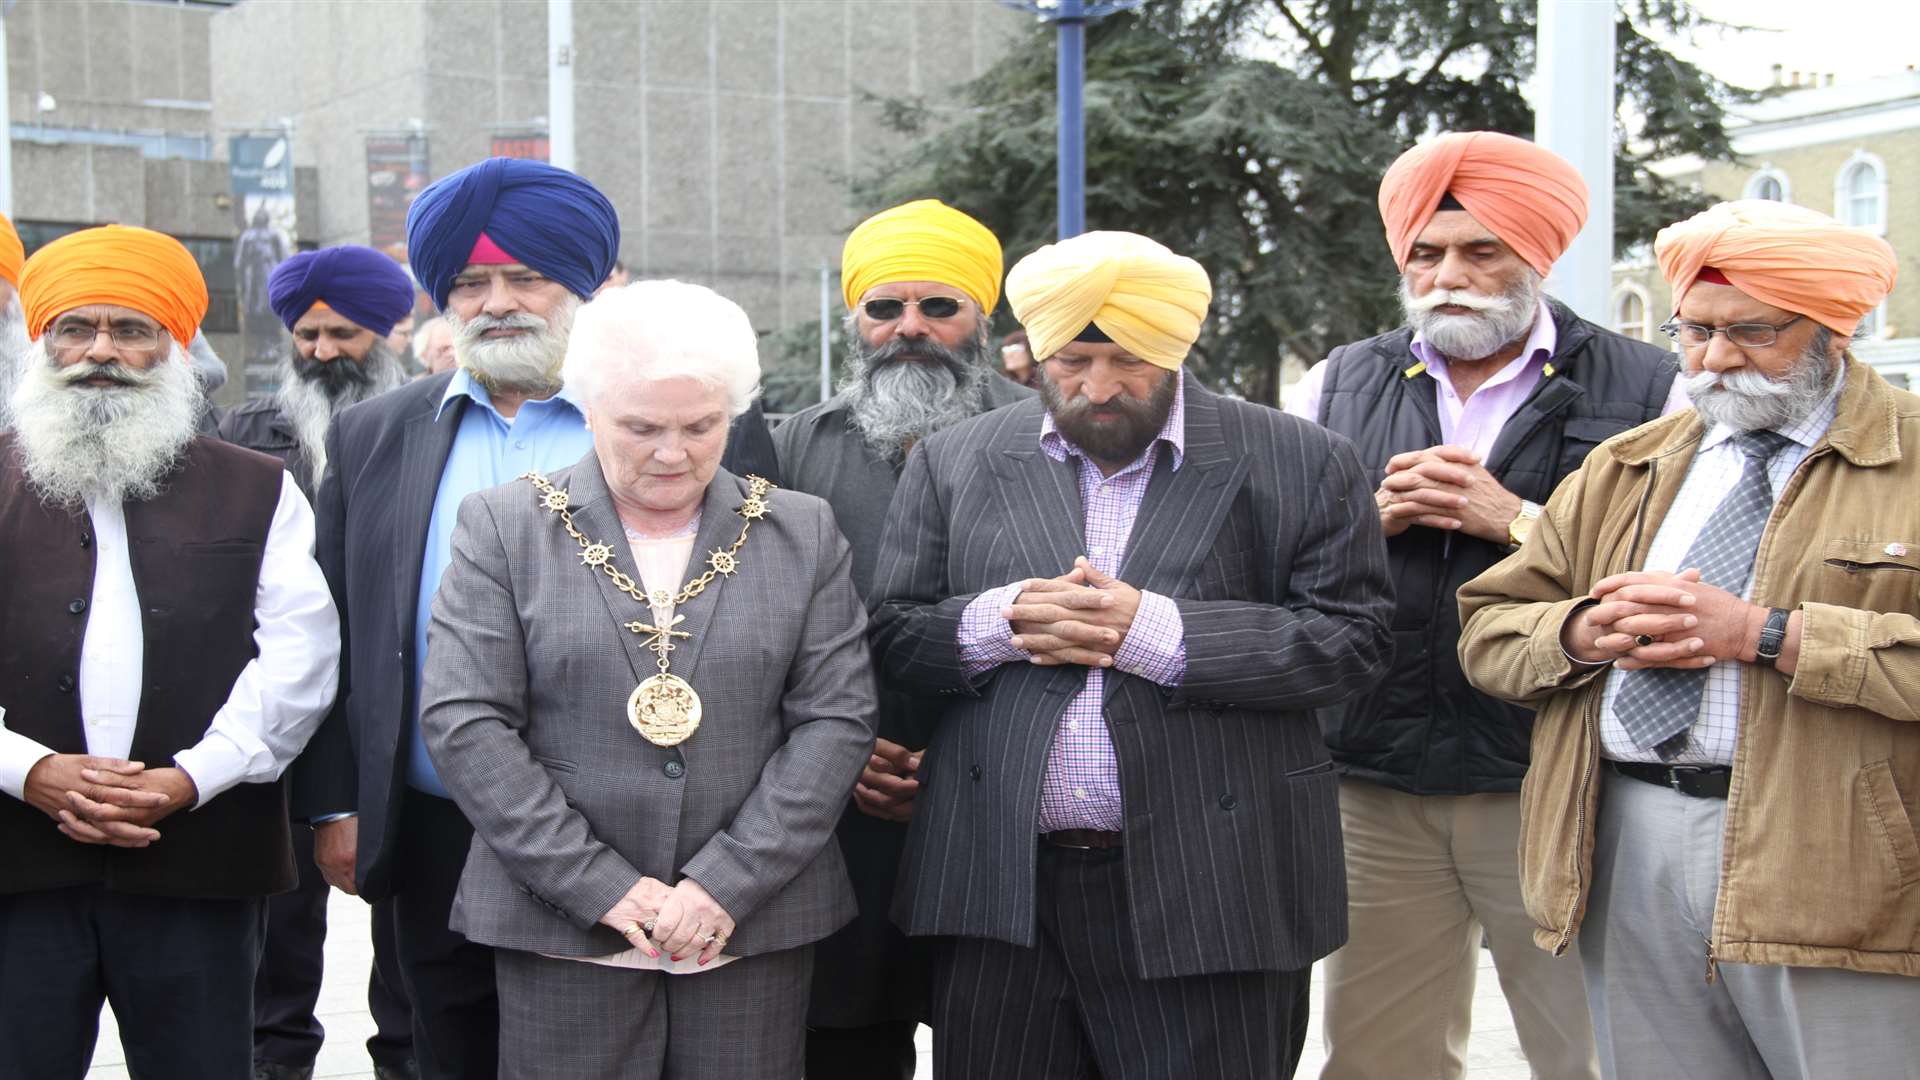 The opening ceremony included prayer. Picture: Gravesham Borough Council